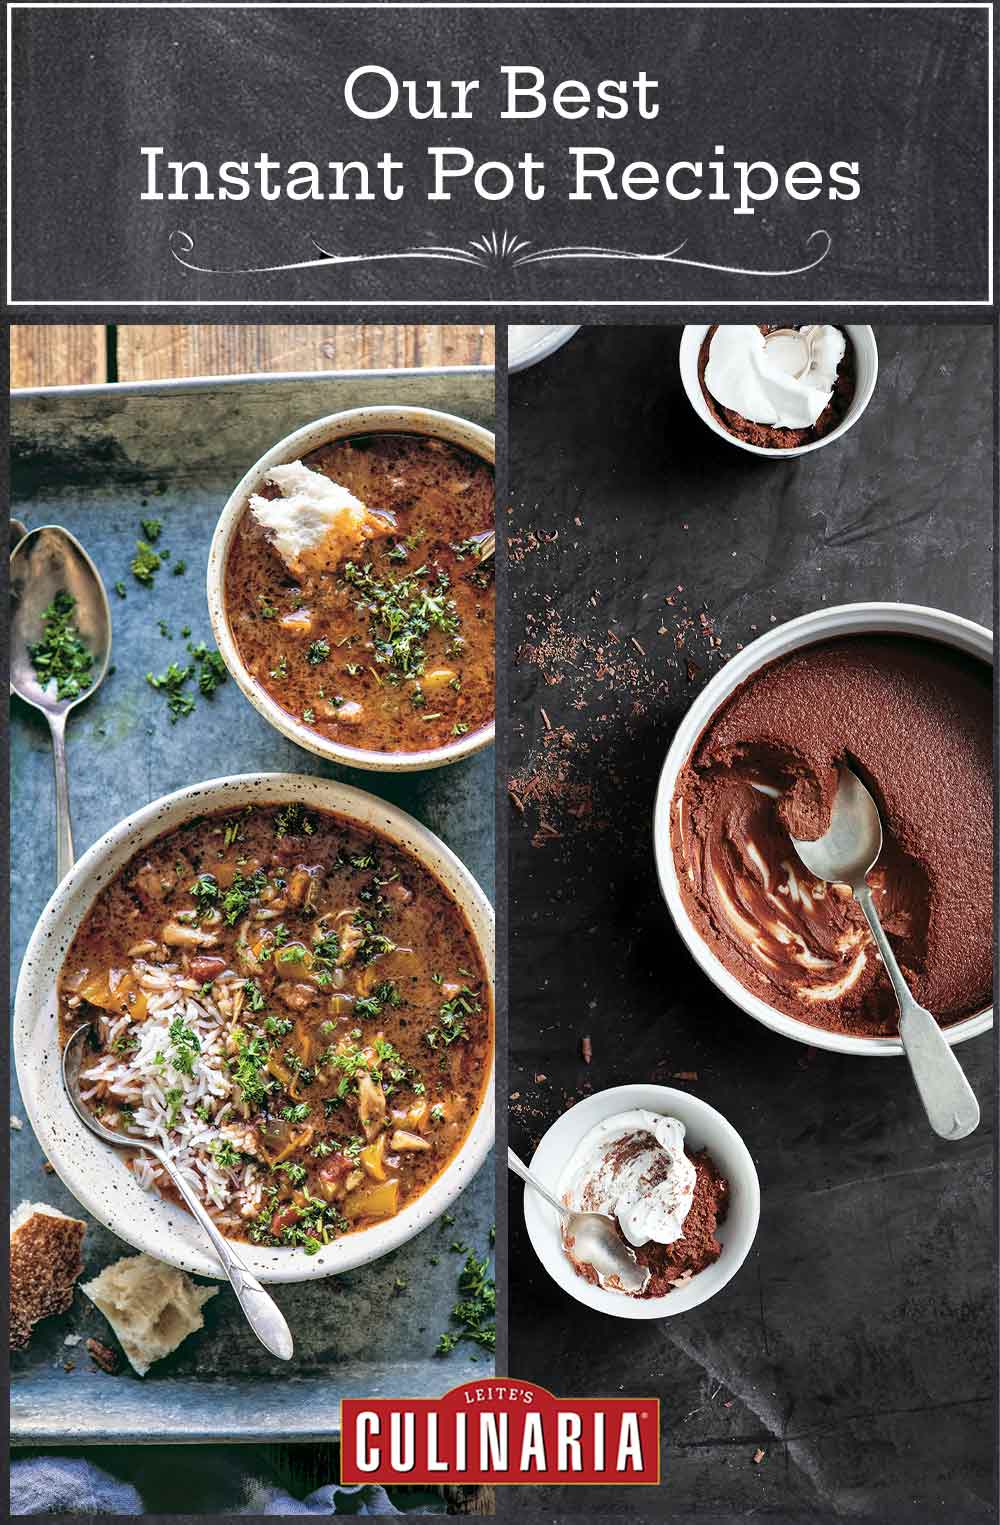 Images of two of the 16 Instant Pot recipes -- chicken gumbo and chocolate pudding.